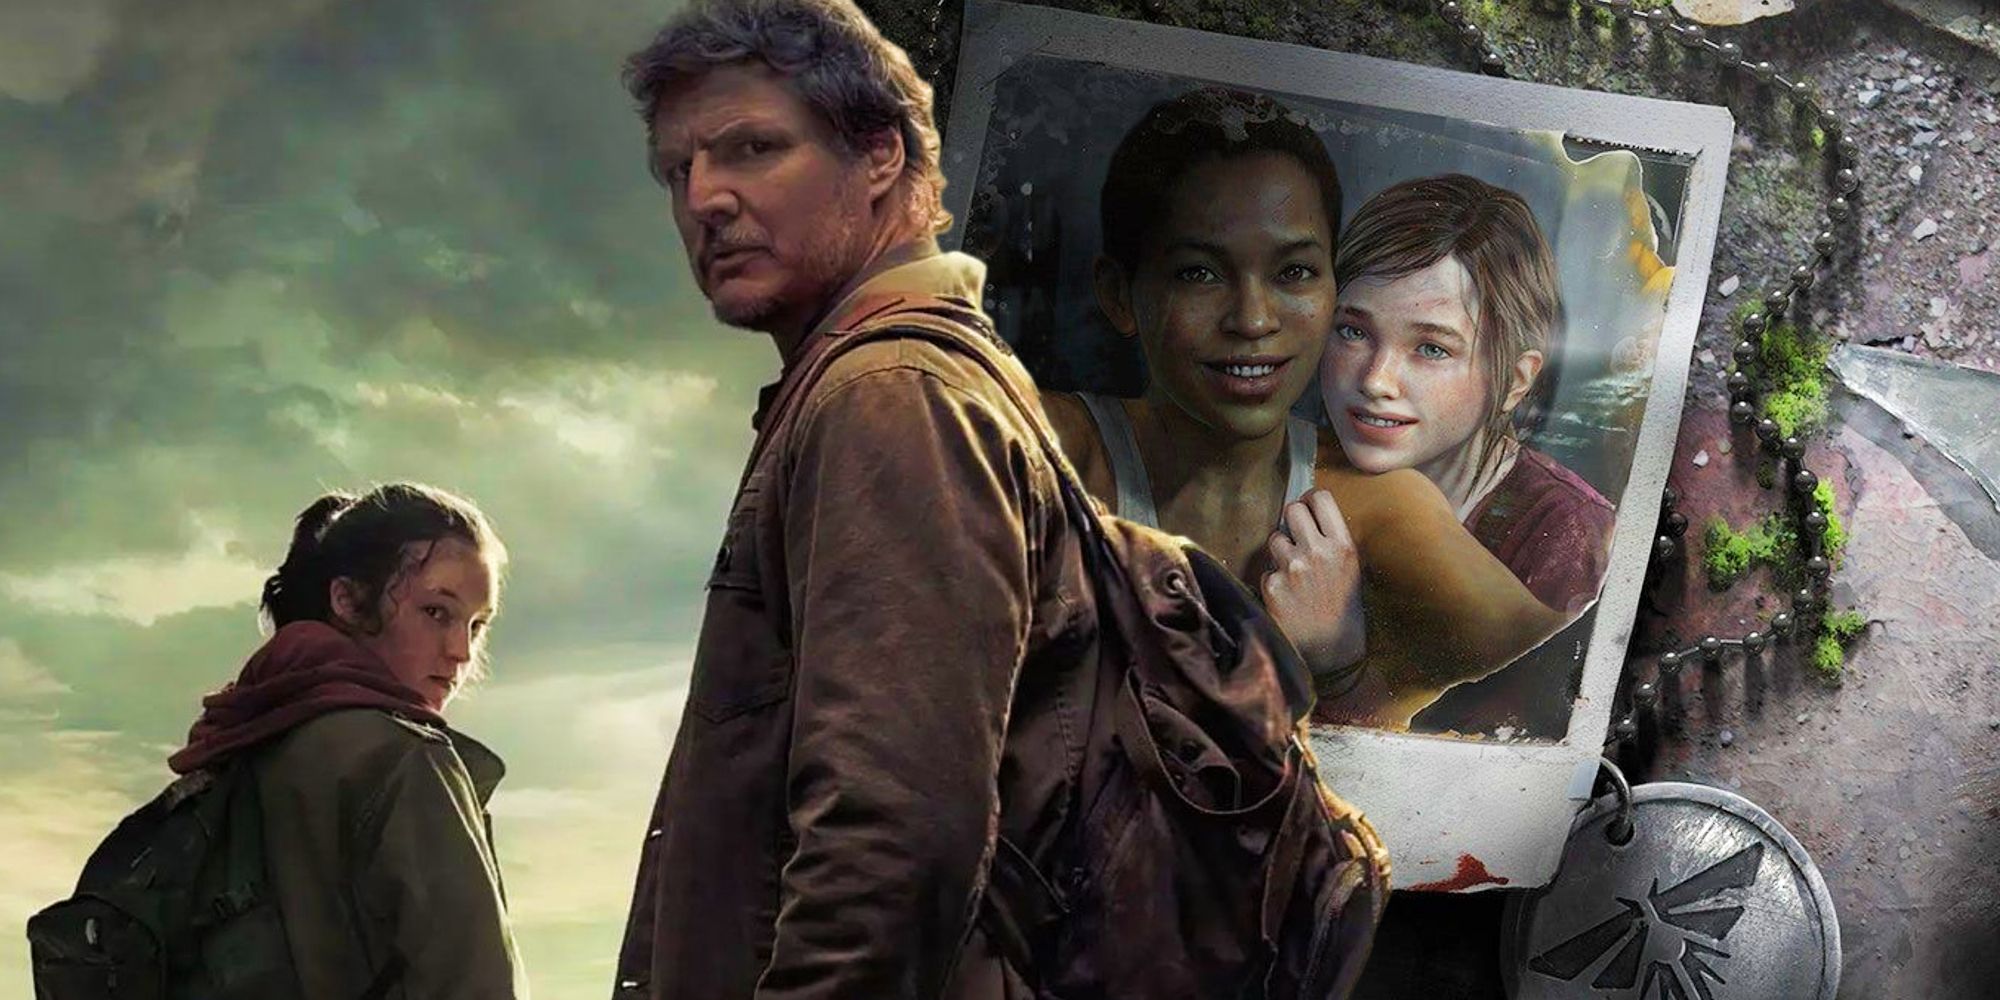 Ellie and Riley smiling in a polaroid photo in the poster for Left Behind and Ellie and Joel from The Last of Us poster for HBO